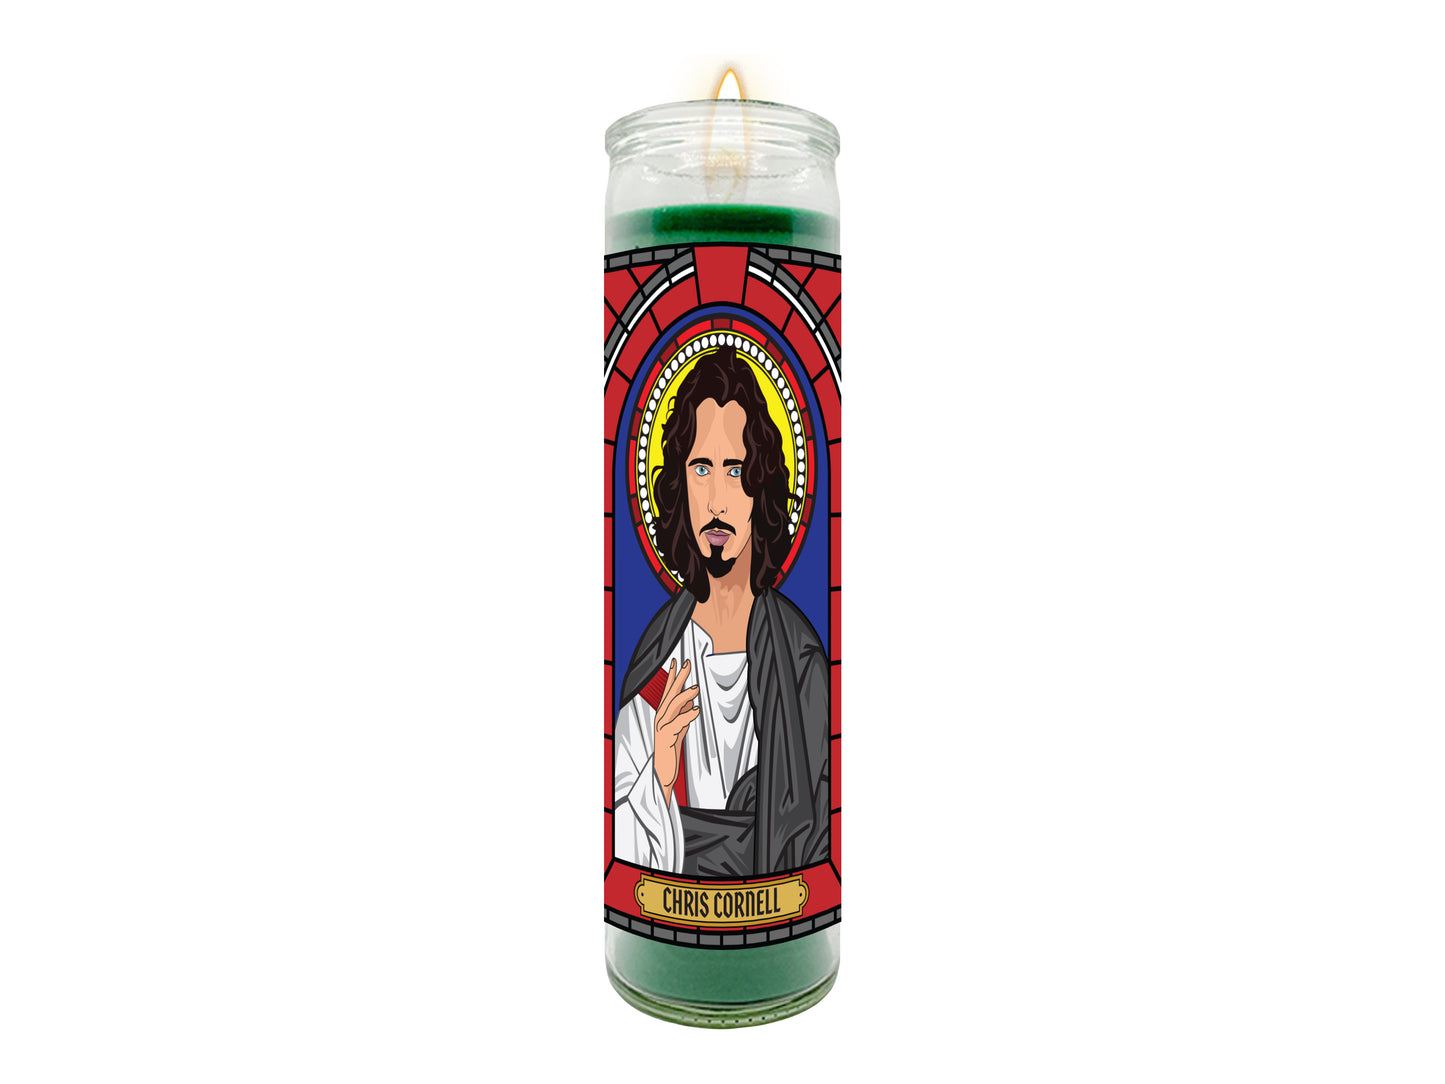 Chris Cornell Soundgarden Audioslave Temple of the Dog Illustrated Prayer Candle